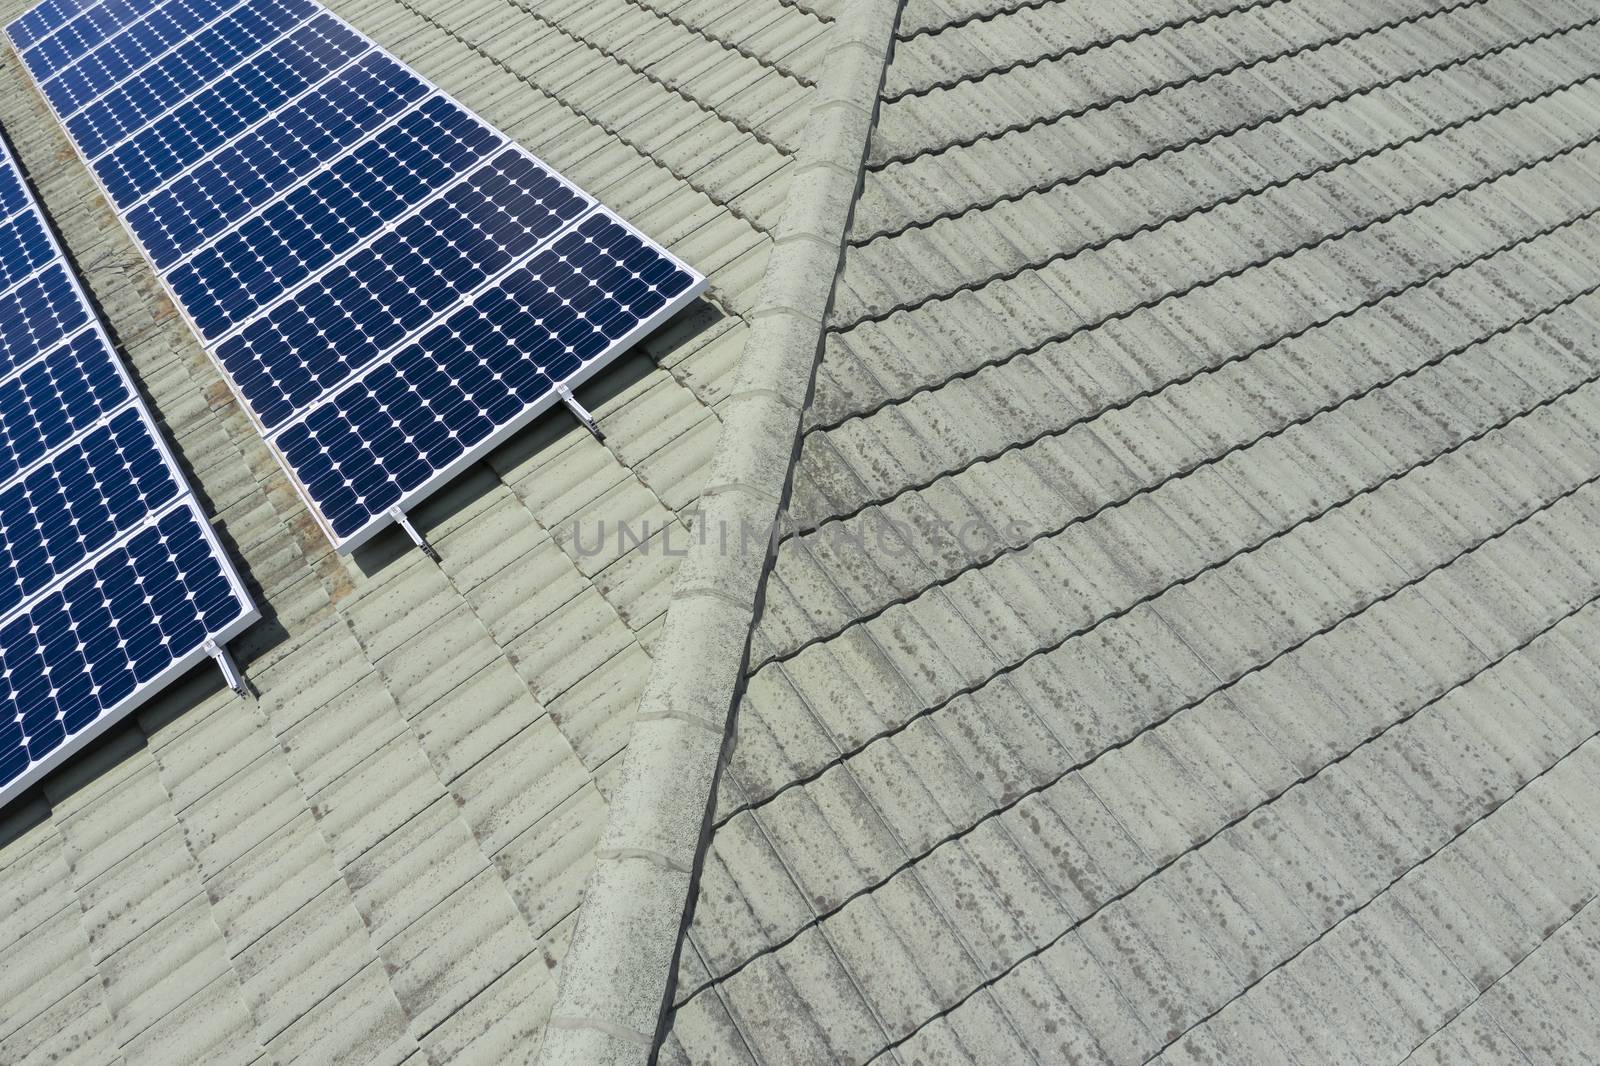 Blue solar panels on a green tiled roof in the bright sunshine.